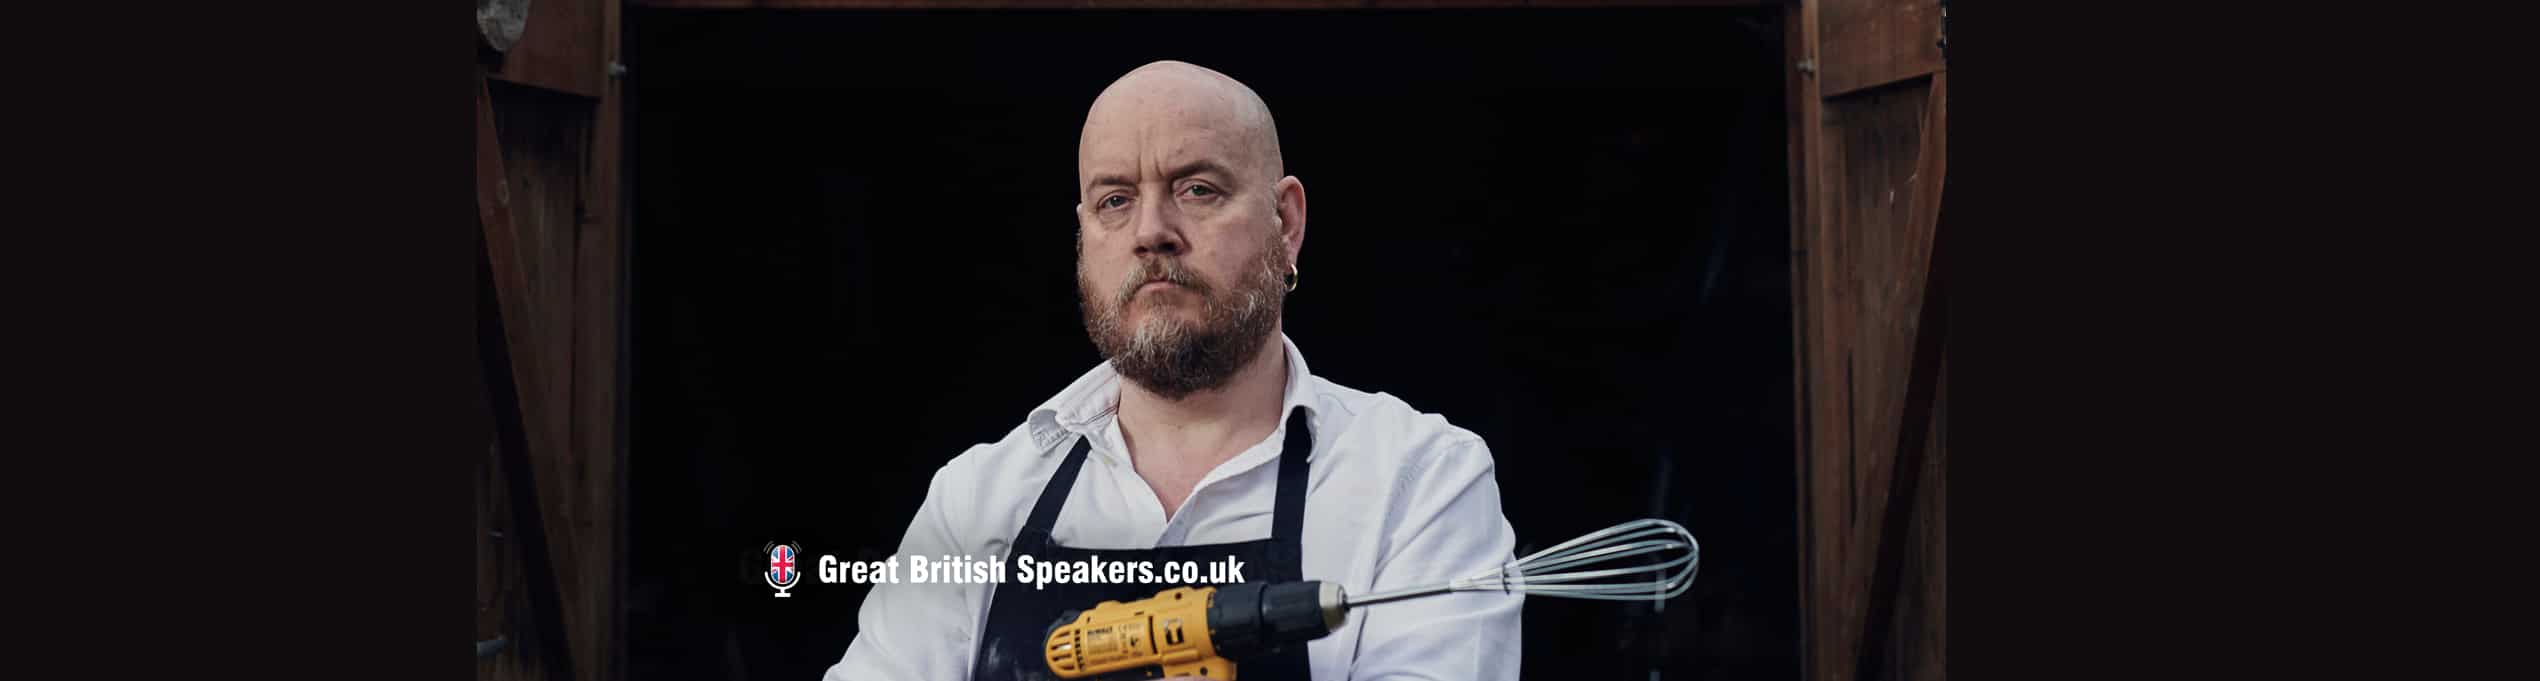 George-Egg-Anarchist-Cook-at-Great-British-Speakers